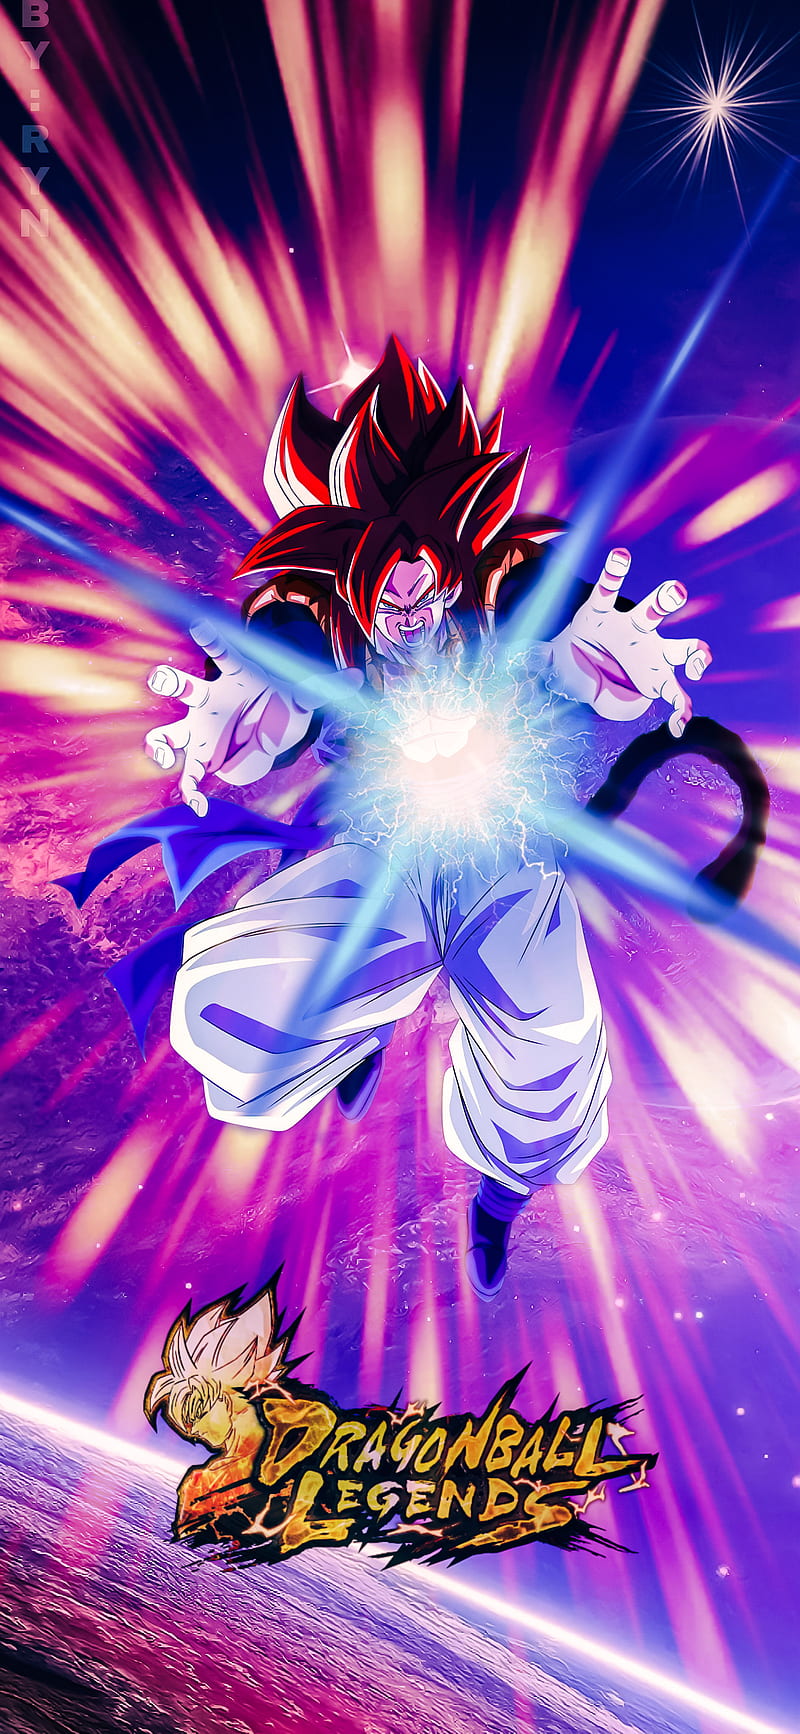 GOGETA SSJ4 wallpaper by MikeAme - Download on ZEDGE™ | 8b40